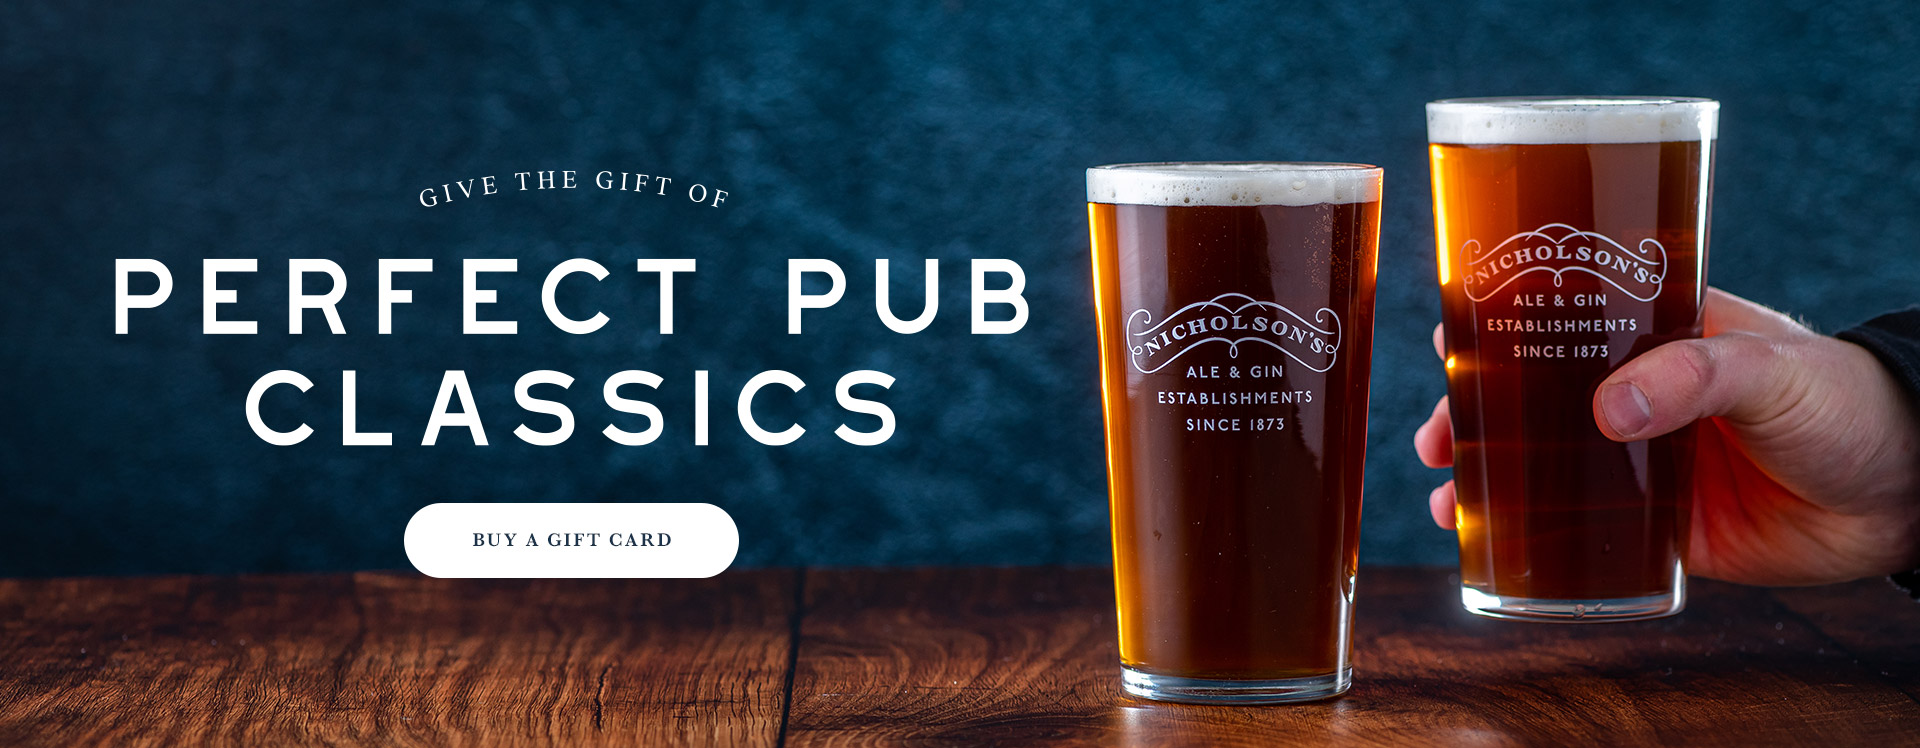 Nicholson’s Pub Gift Voucher at The Magpie in London